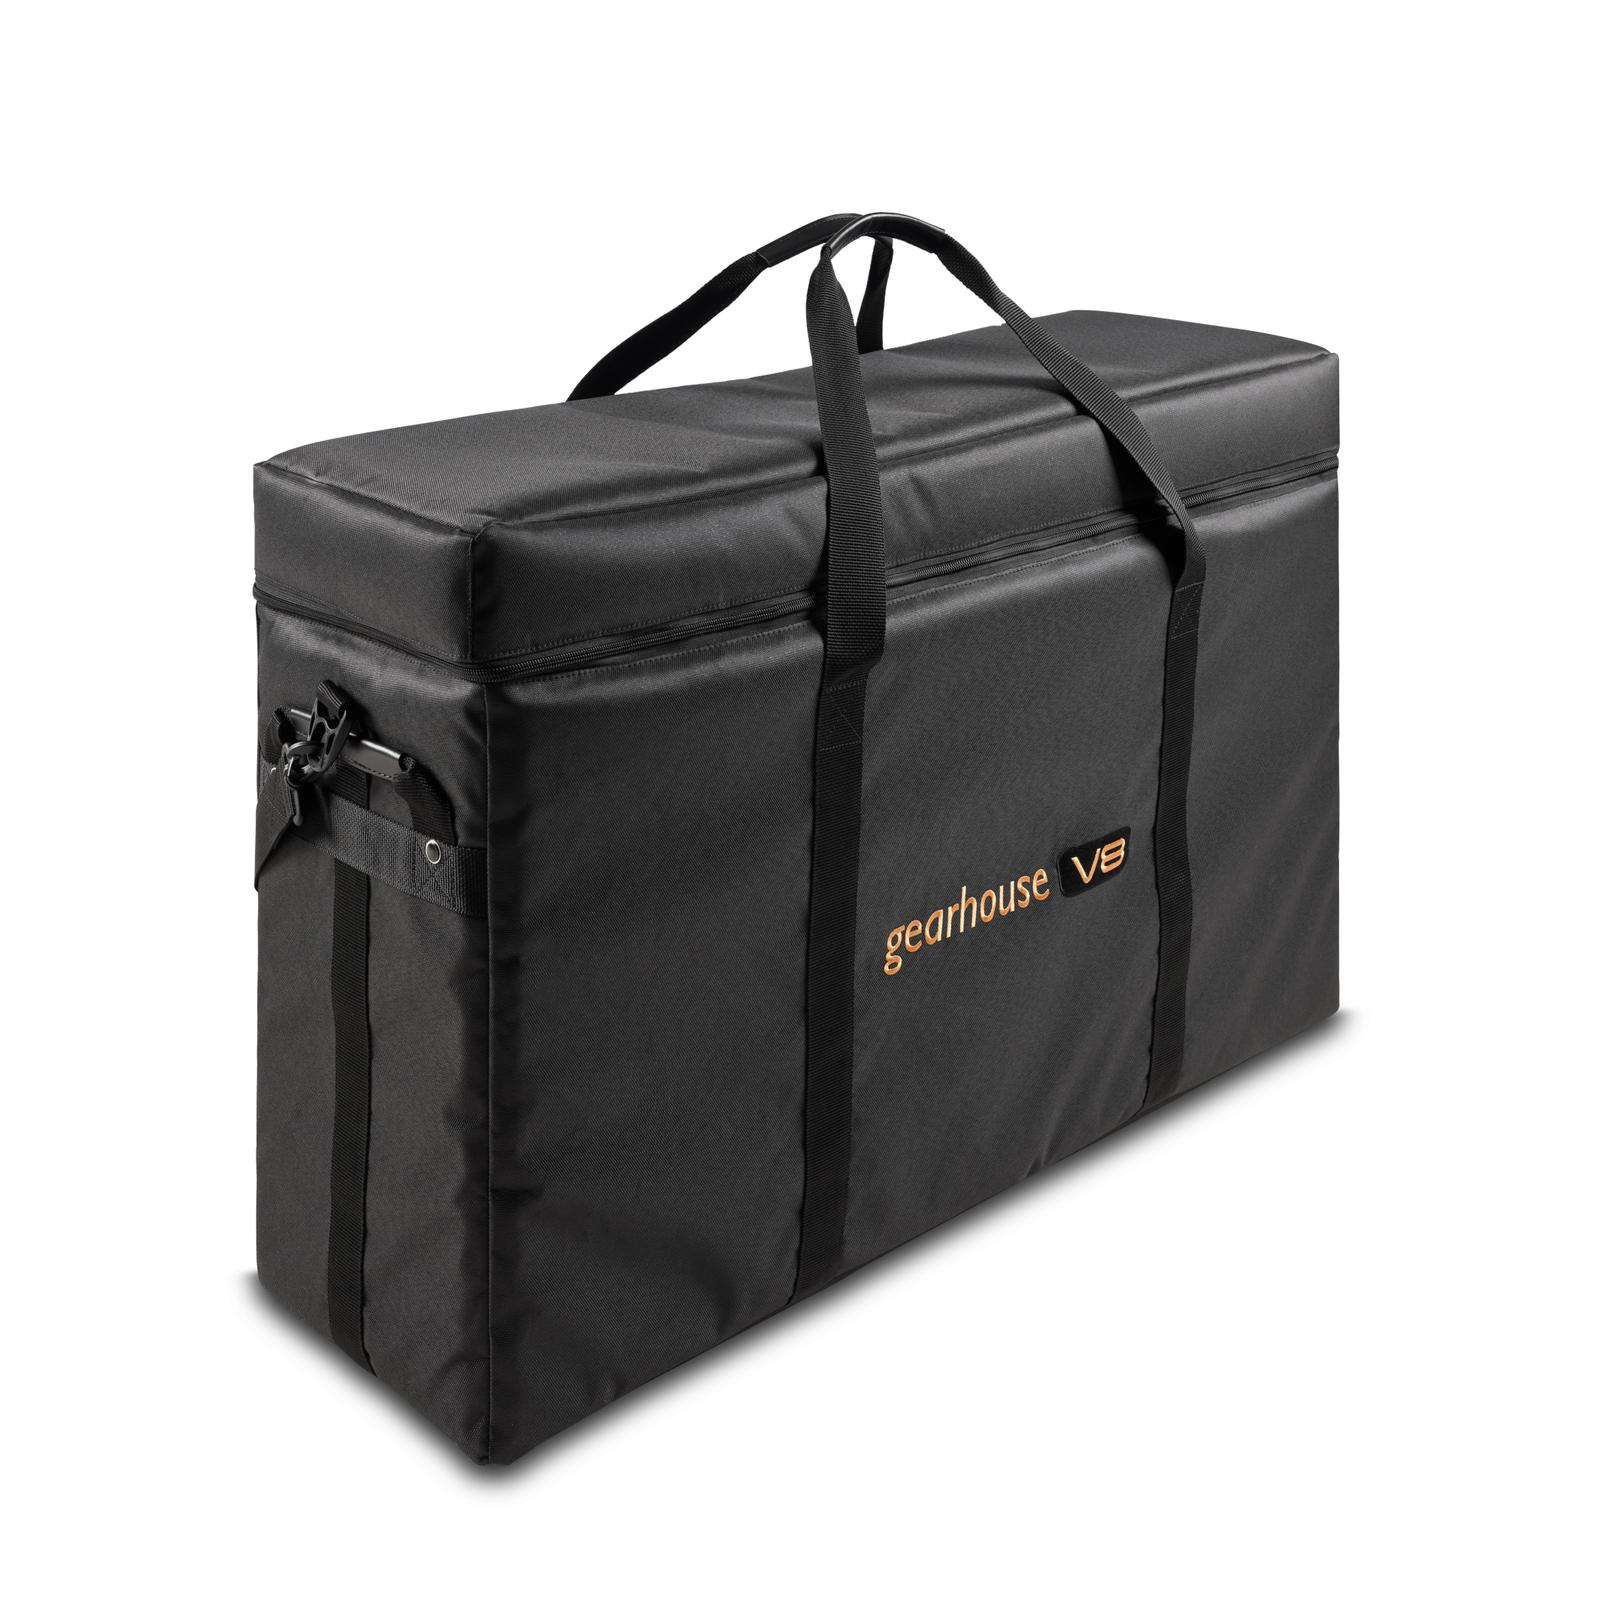 Gearhouse Bag Lighting Bags GEARHOUSE Bag V8 DopPRO